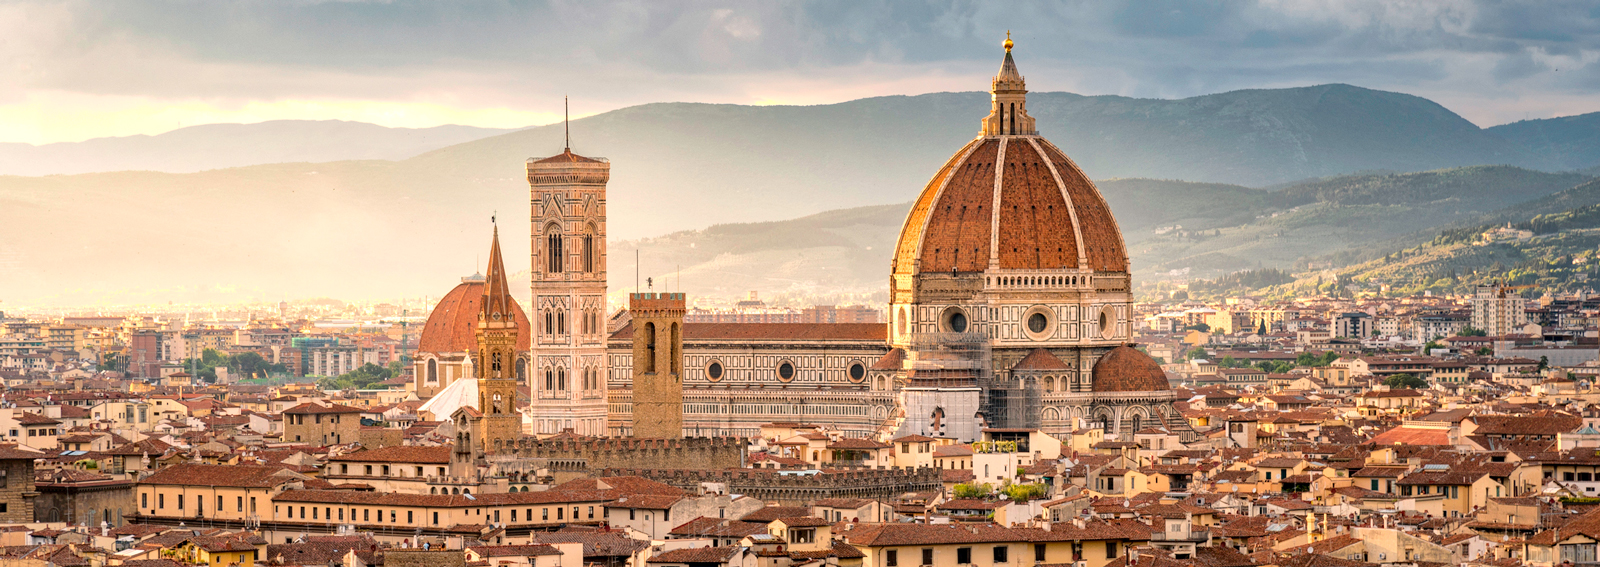 GettyImages-firenze